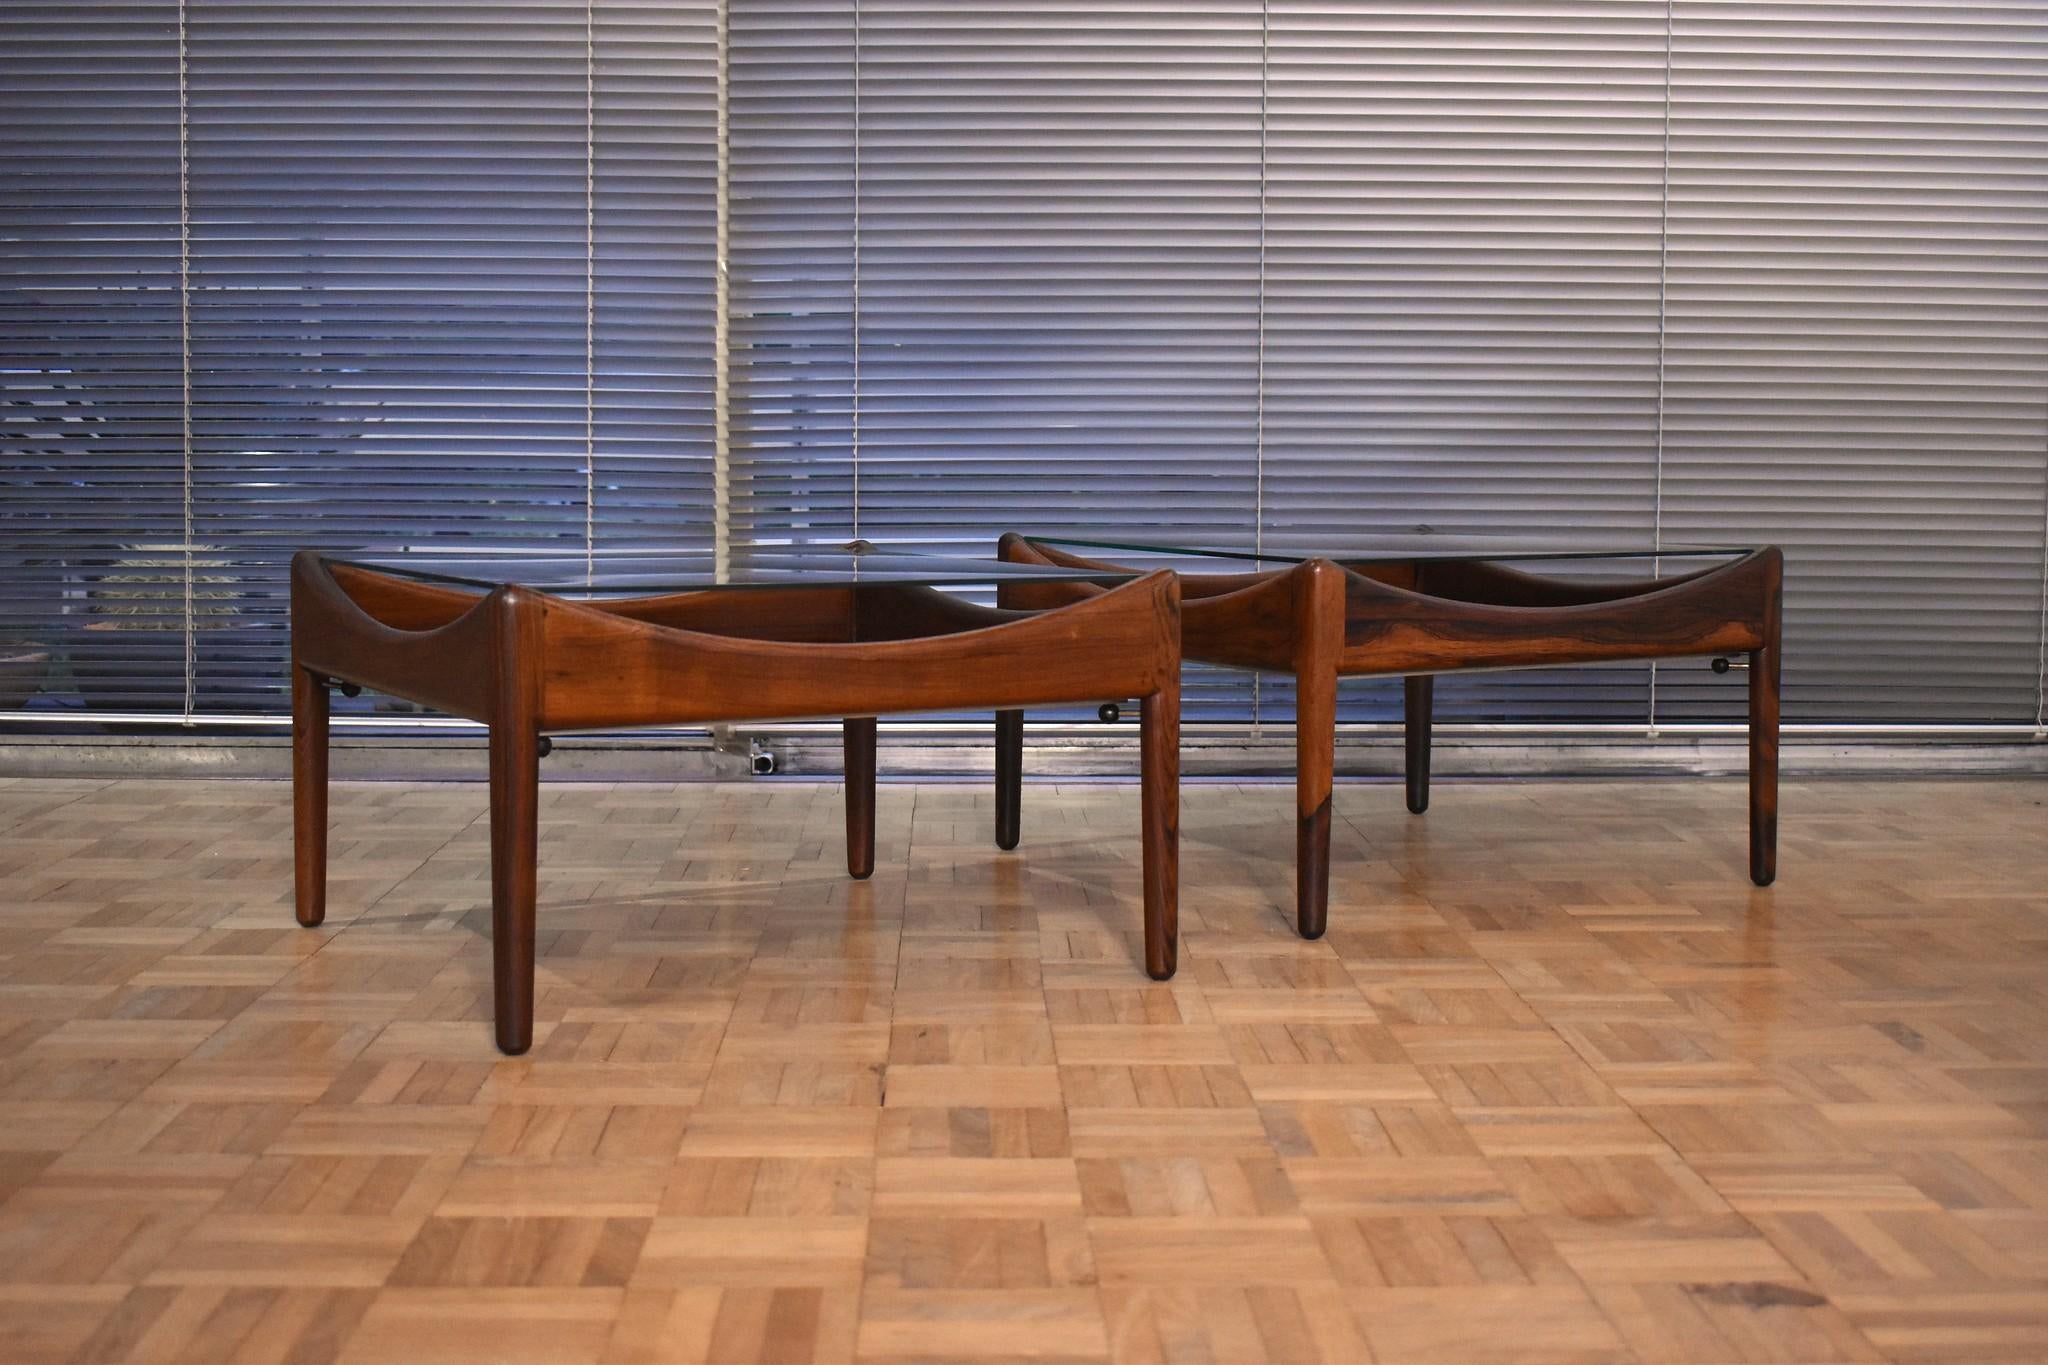 A pair of Brazilian rosewood, steel and glass coffee/end tables designed as part of the Modus range of furniture by Kristian Vedel, produced by Soren Willadsen, Denmark.

It is very hard to find such original and complete tables as these. Beneath